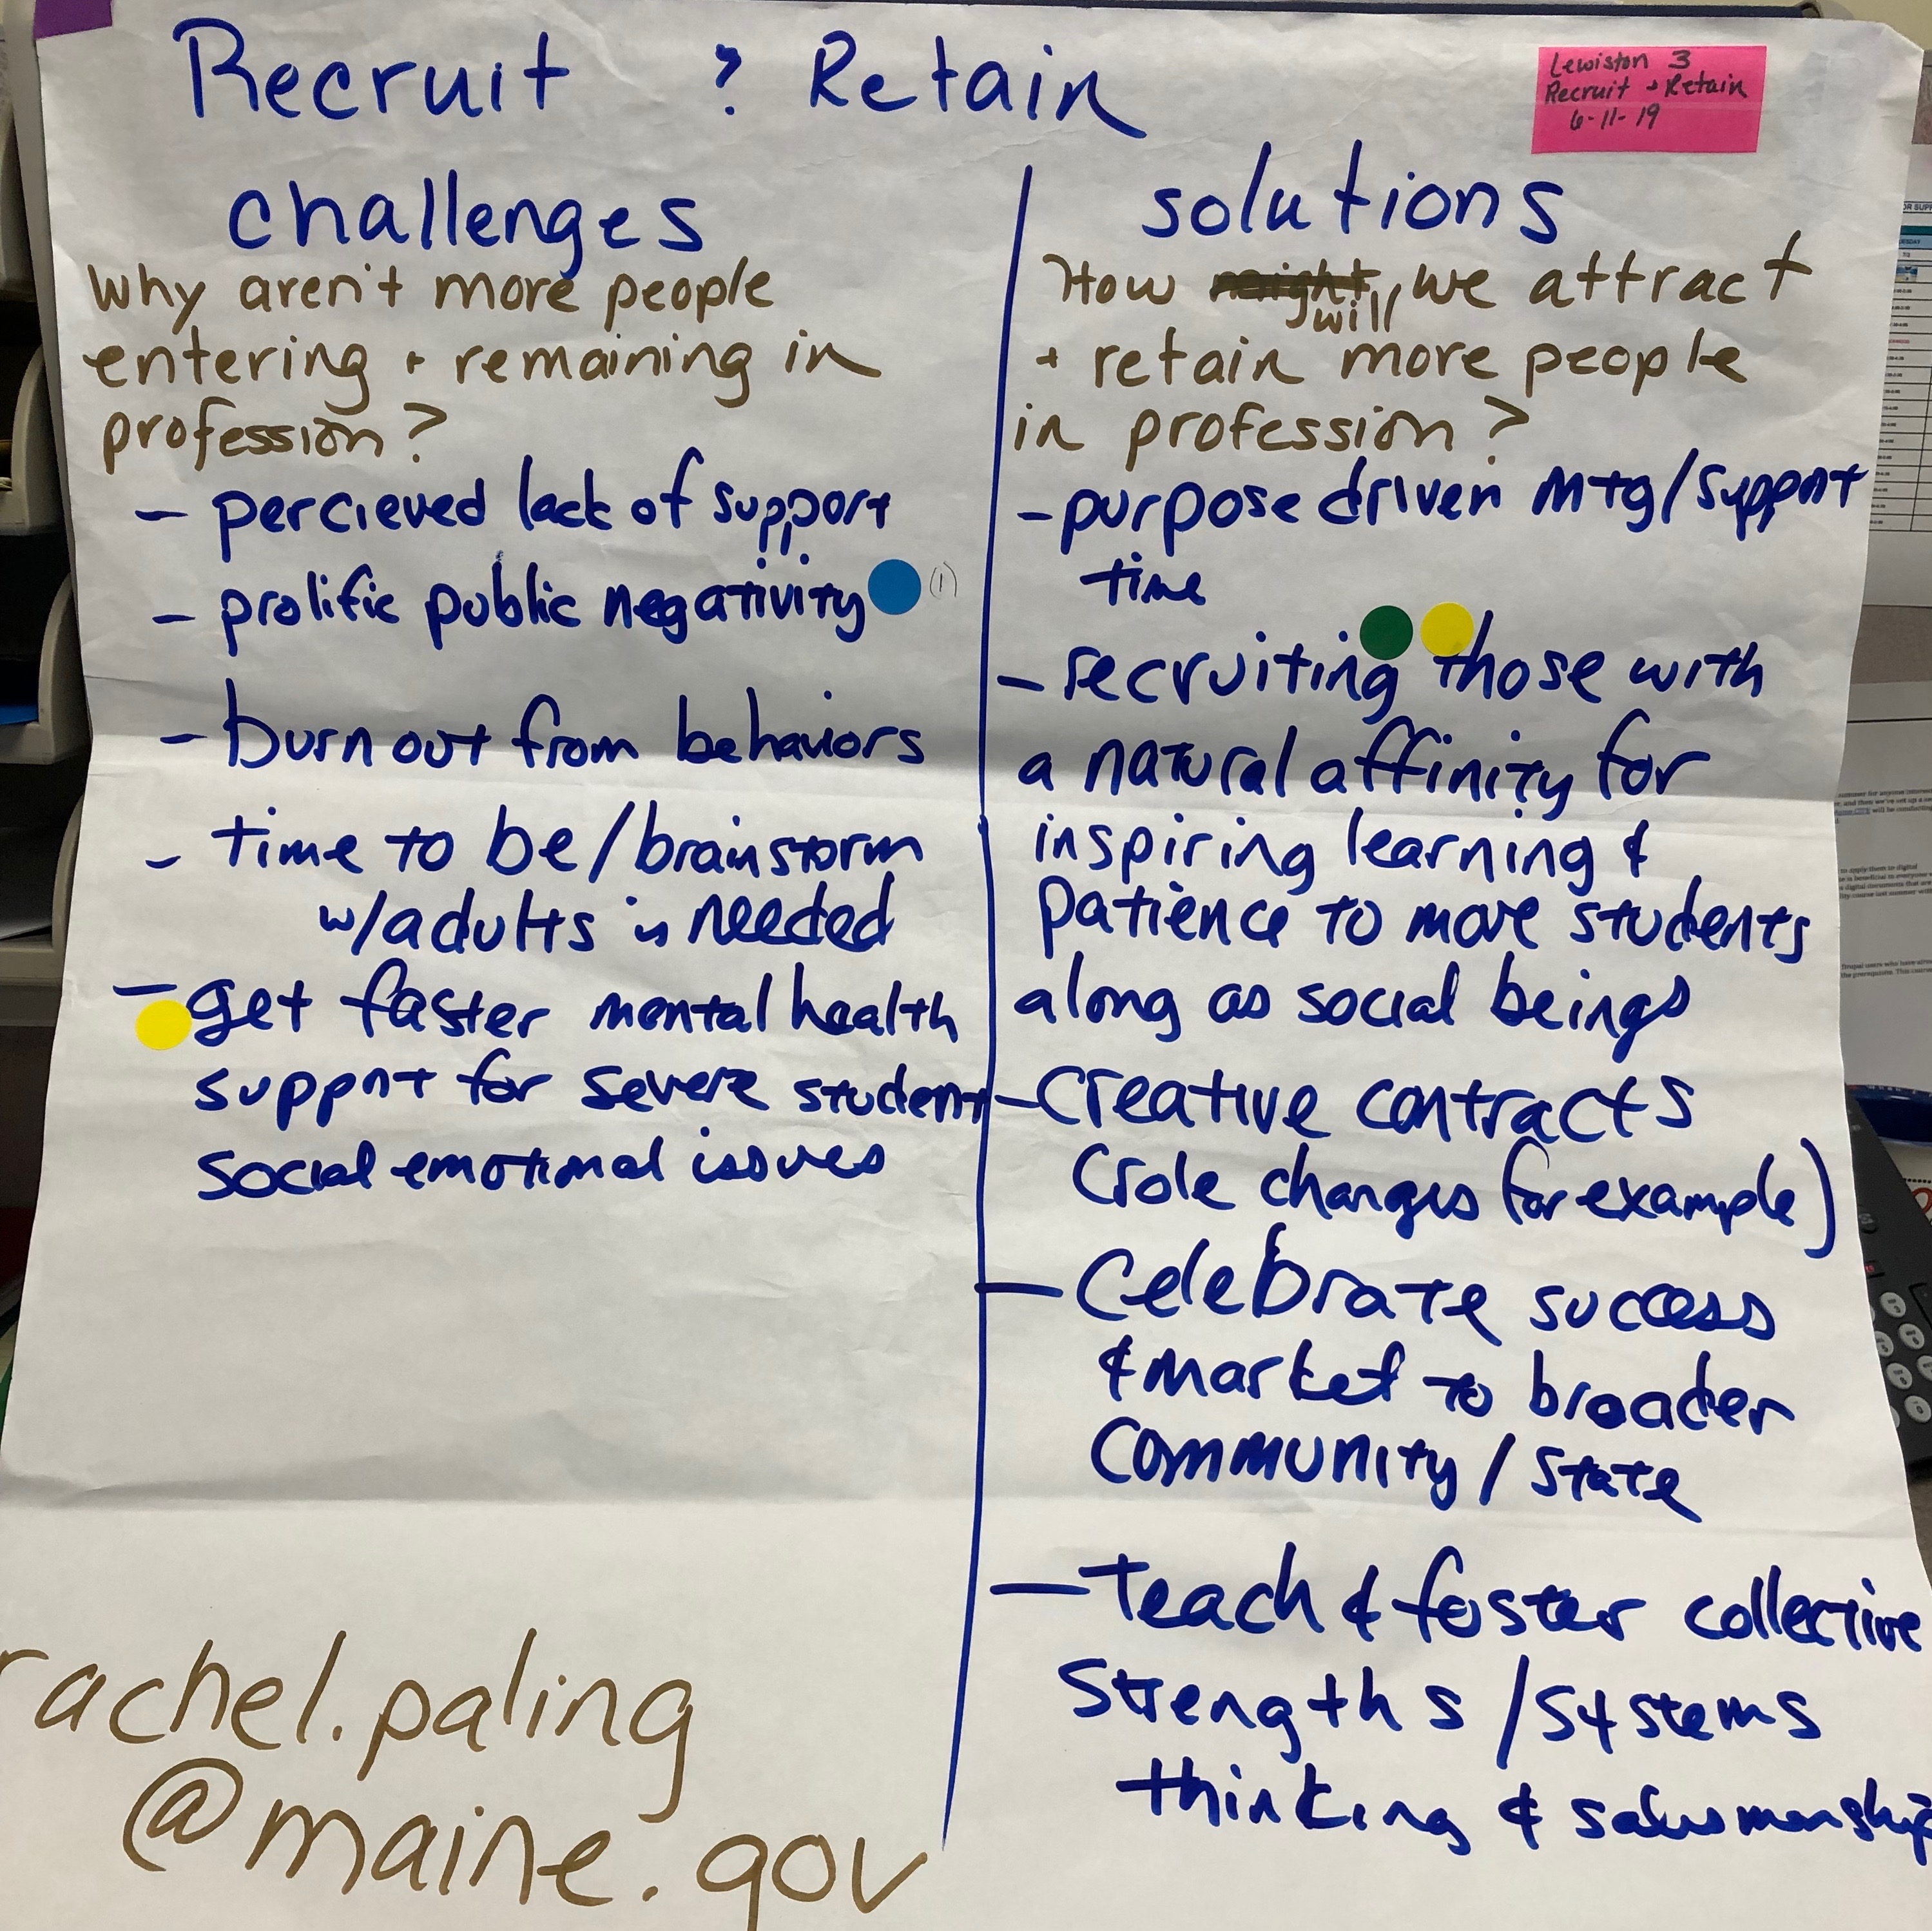 L3 Recruit & Retain Chart Paper Notes from work session in Lewiston Maine June 2019